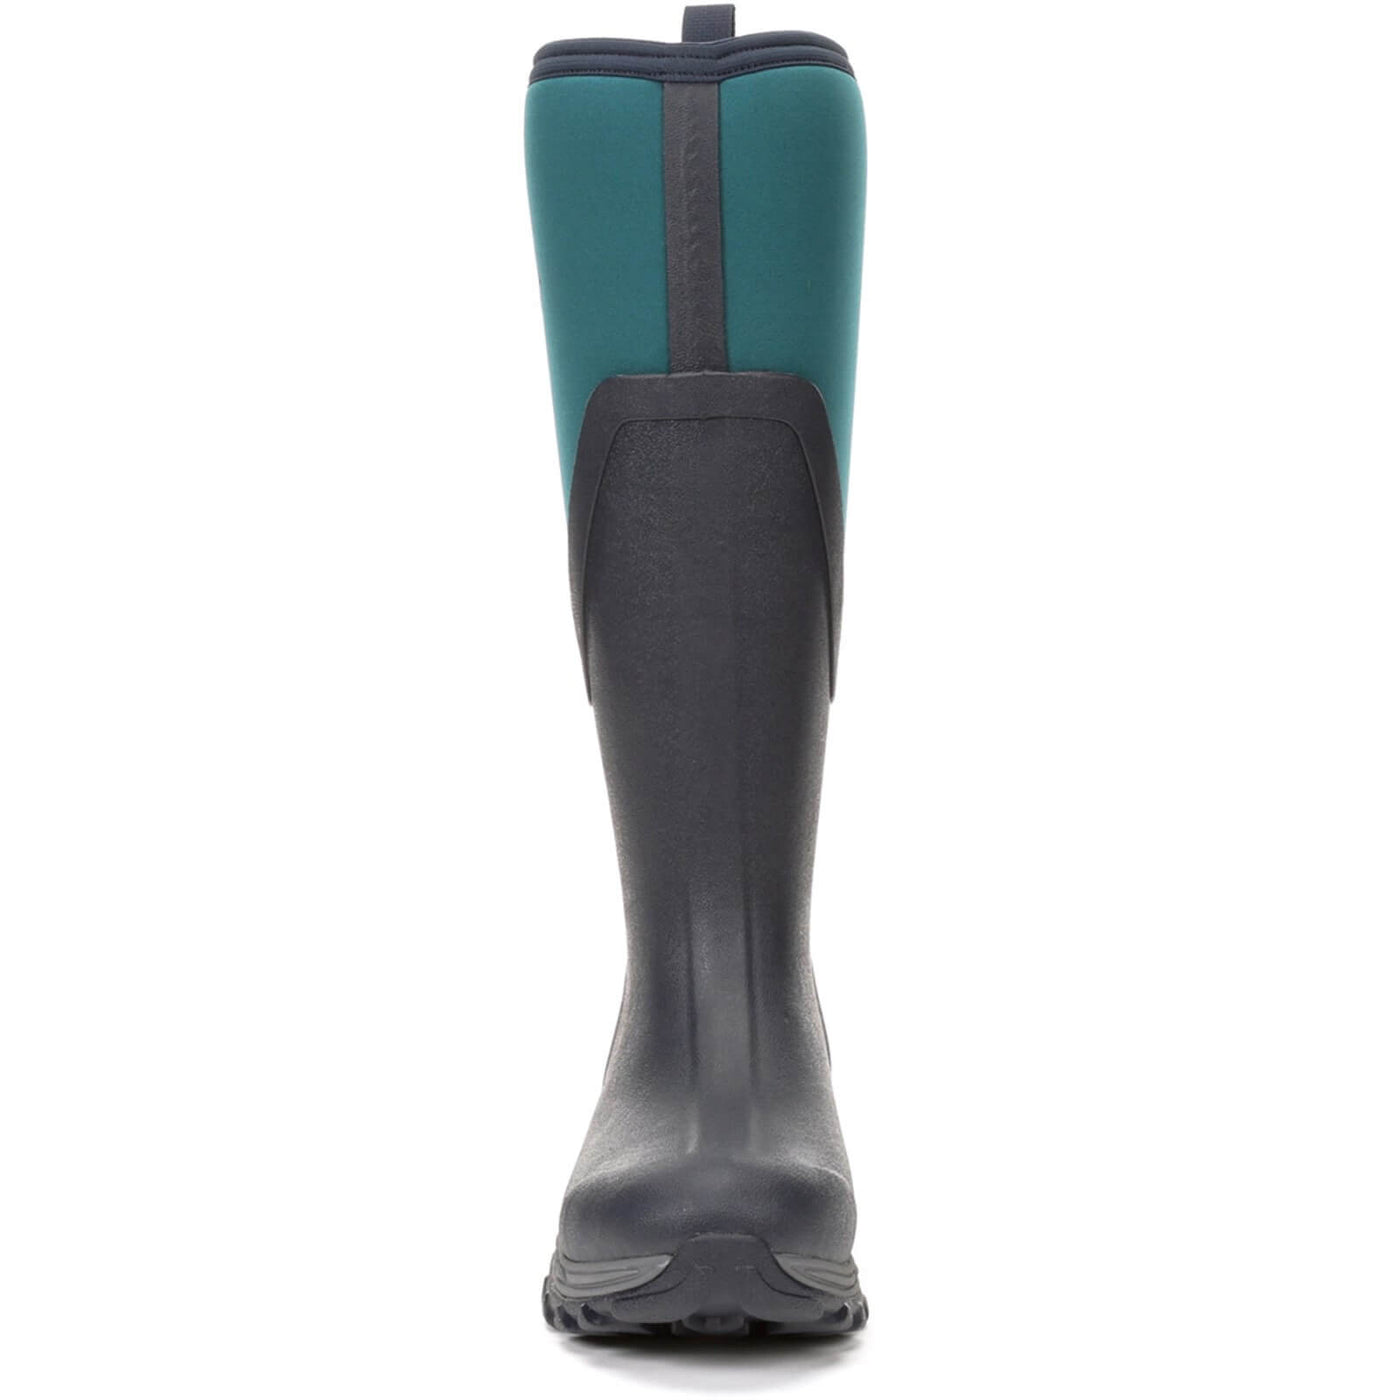 Muck Boots MB Arctic Sport II Tall Wellies Navy/Spruce 3#colour_navy-spruce